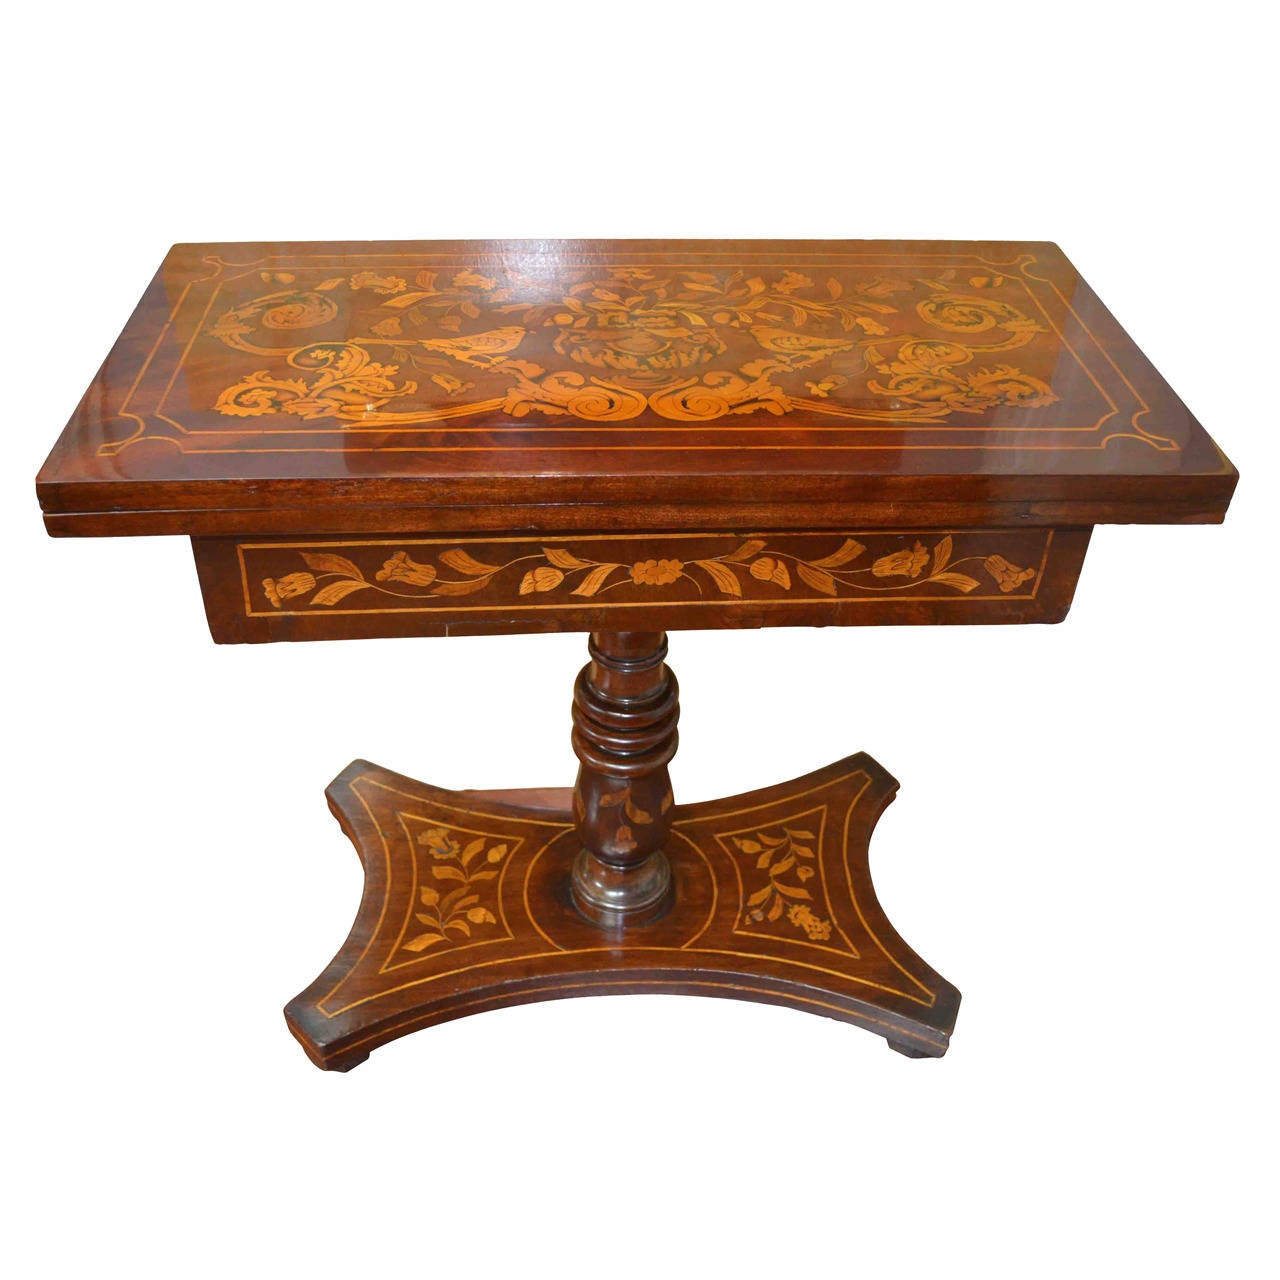 Early 19th Century Dutch Inlaid Mahogany Card or Games Table For Sale